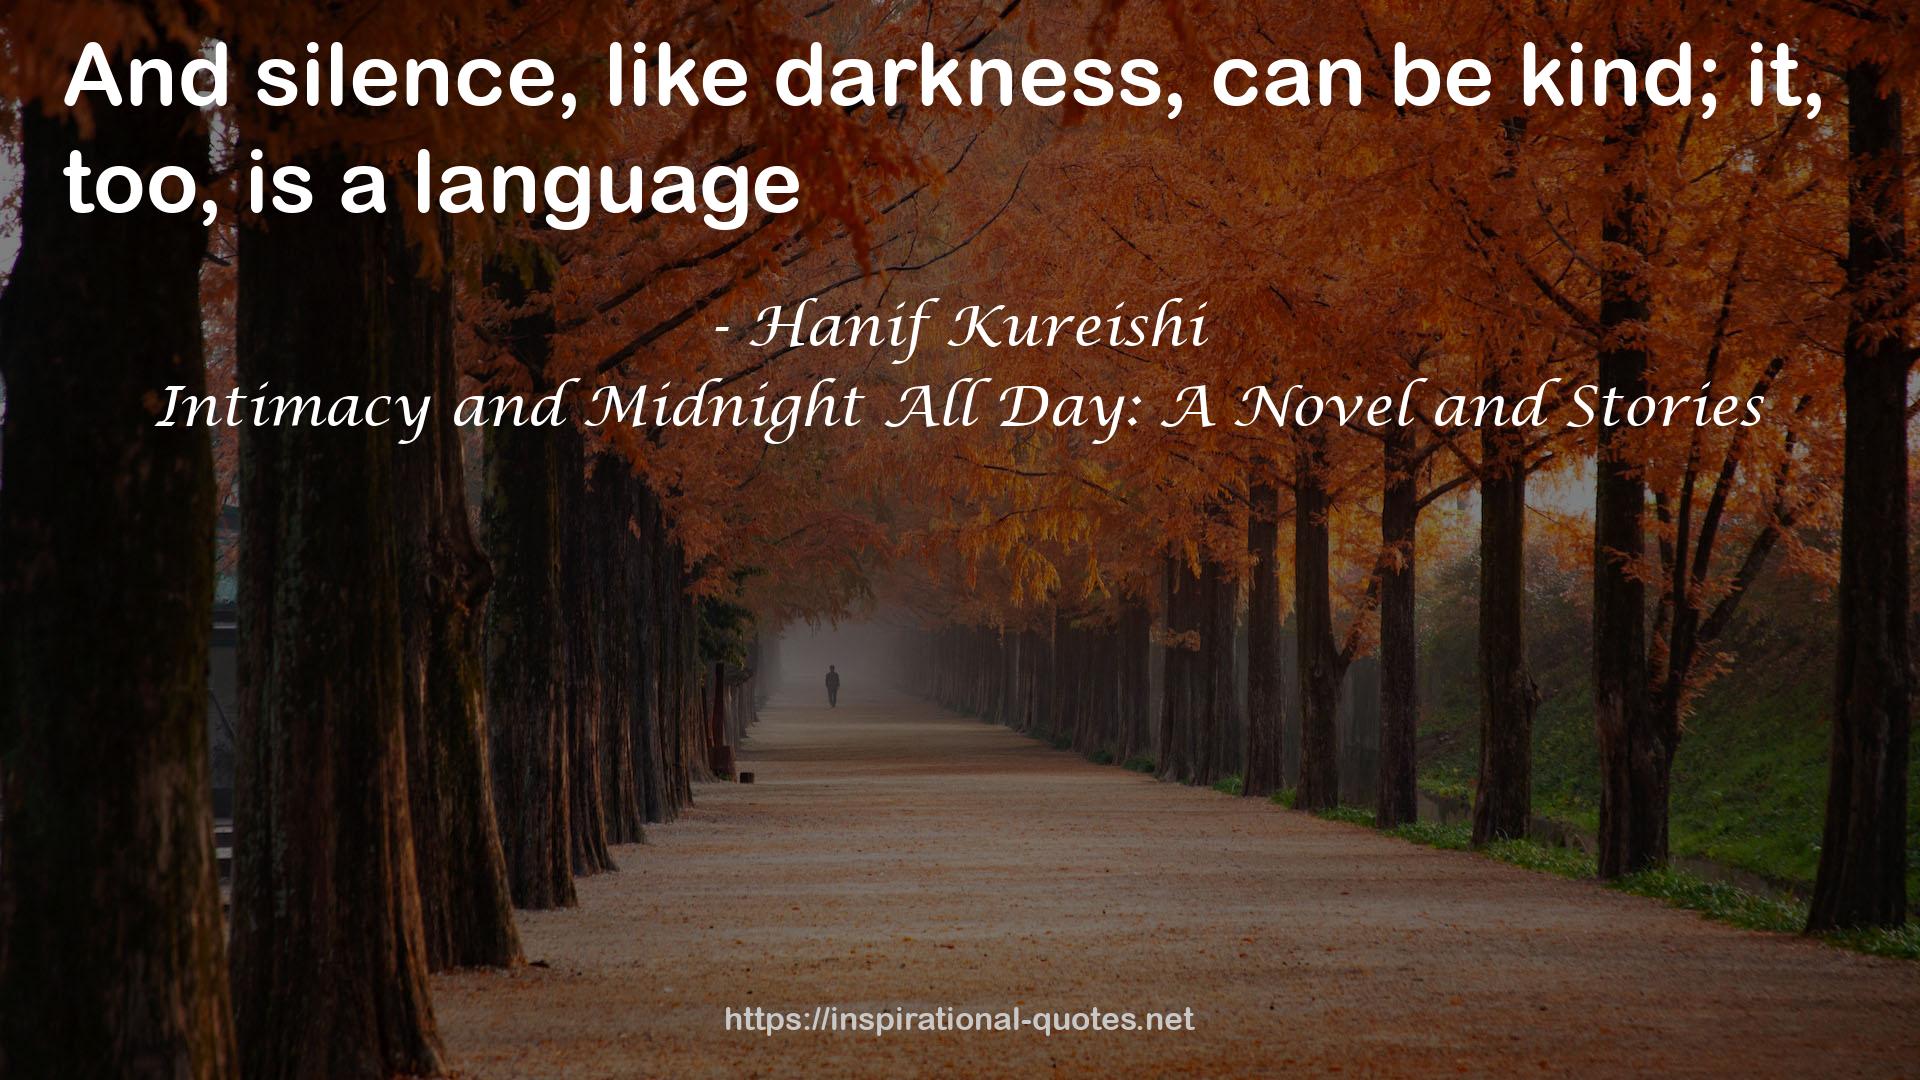 Intimacy and Midnight All Day: A Novel and Stories QUOTES